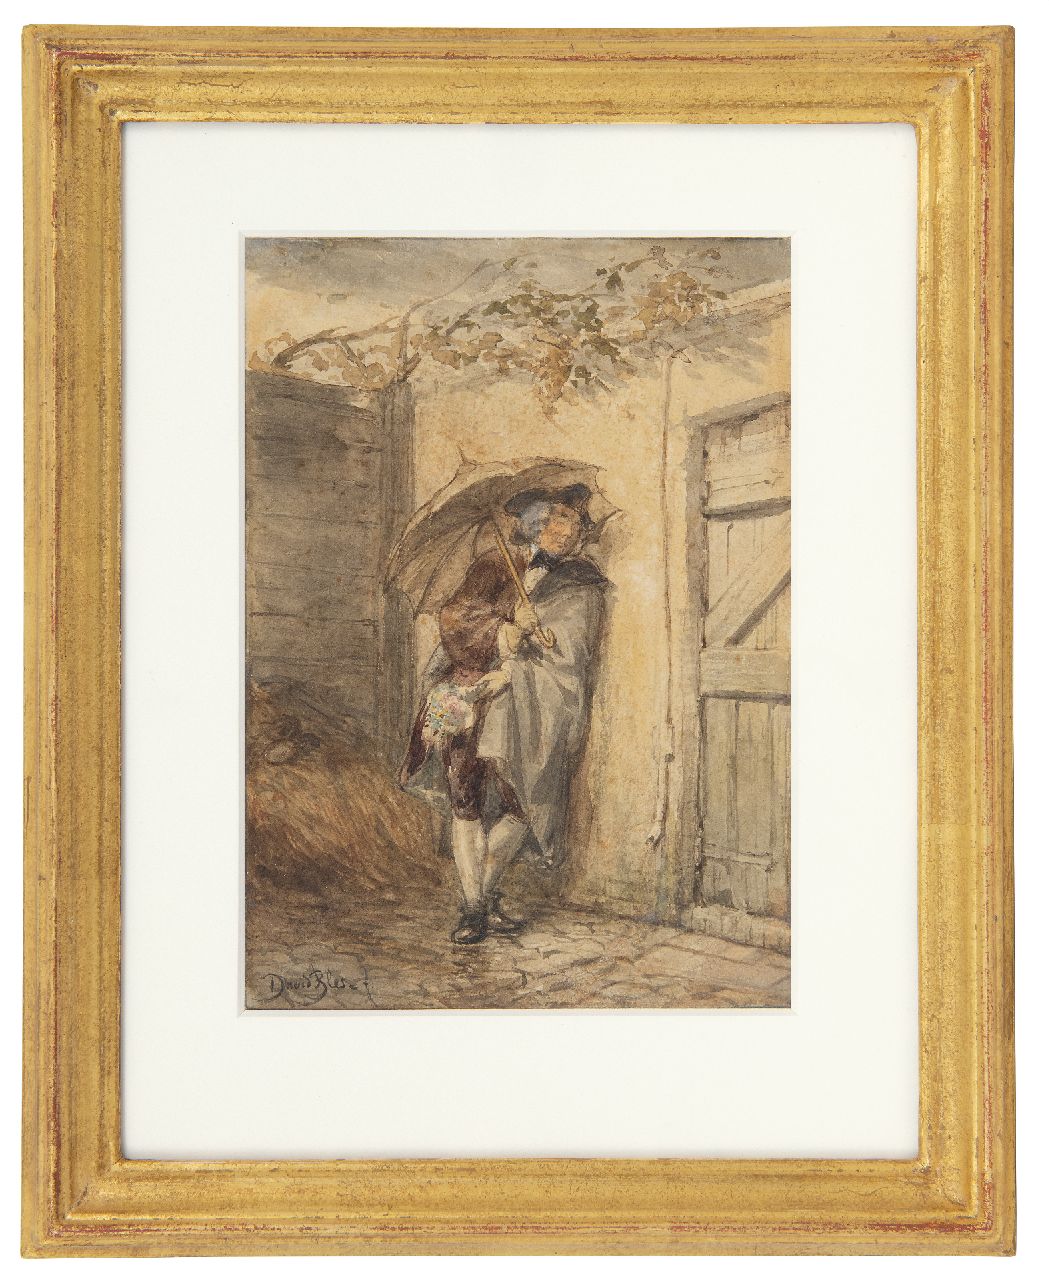 Bles D.J.  | David Joseph Bles | Watercolours and drawings offered for sale | The Rendez-vous, ink and watercolour on paper 18.0 x 12.8 cm, signed l.l. and painted ca. 1856